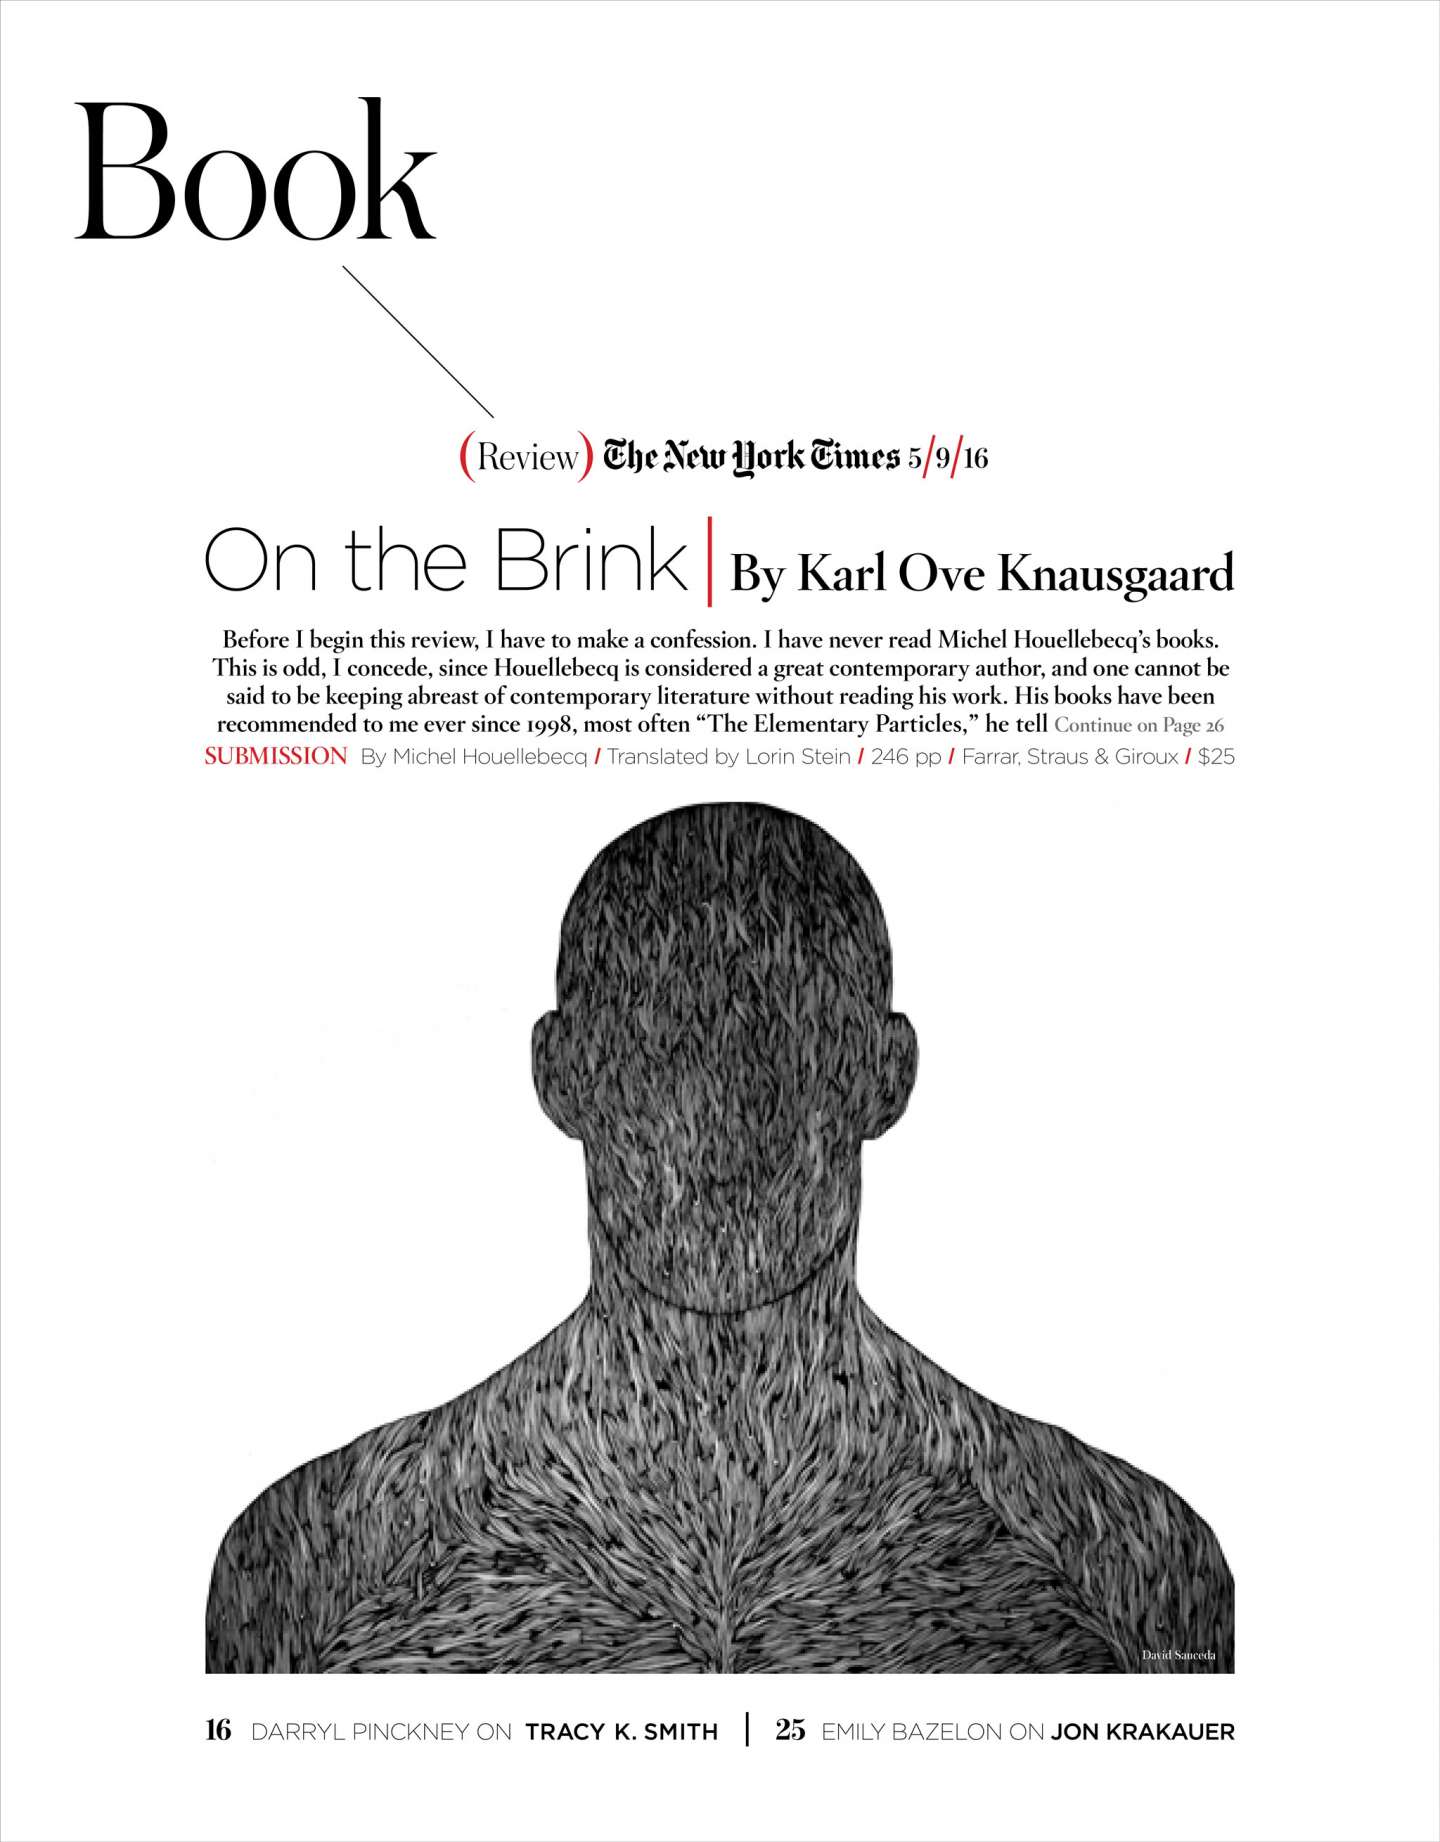 The New York Times Book Review Cover Redesign